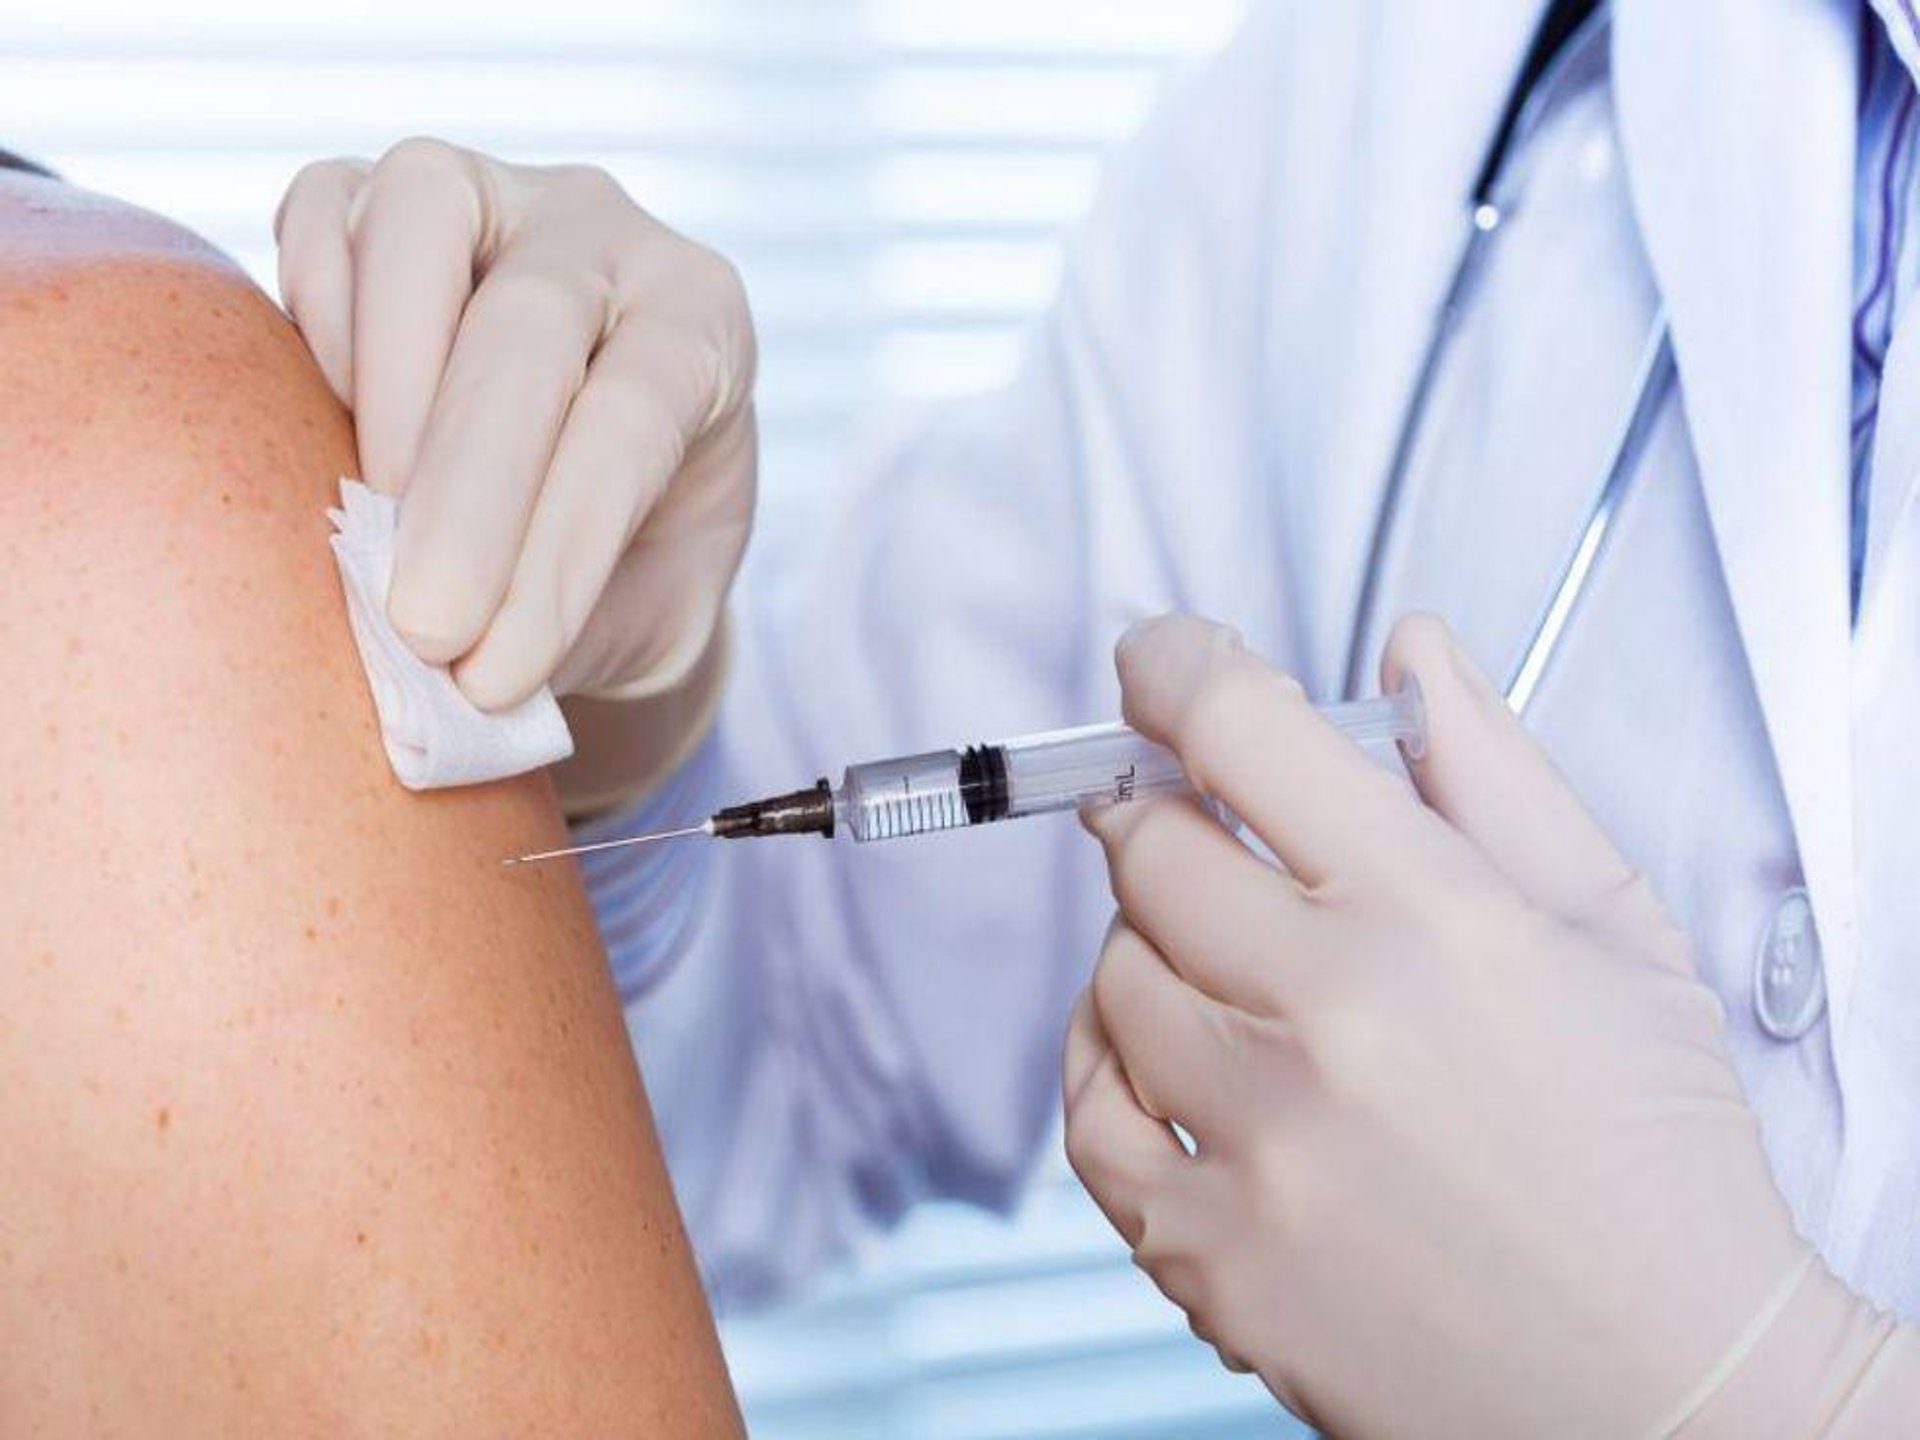 US Sees Big Spike in COVID Vaccinations